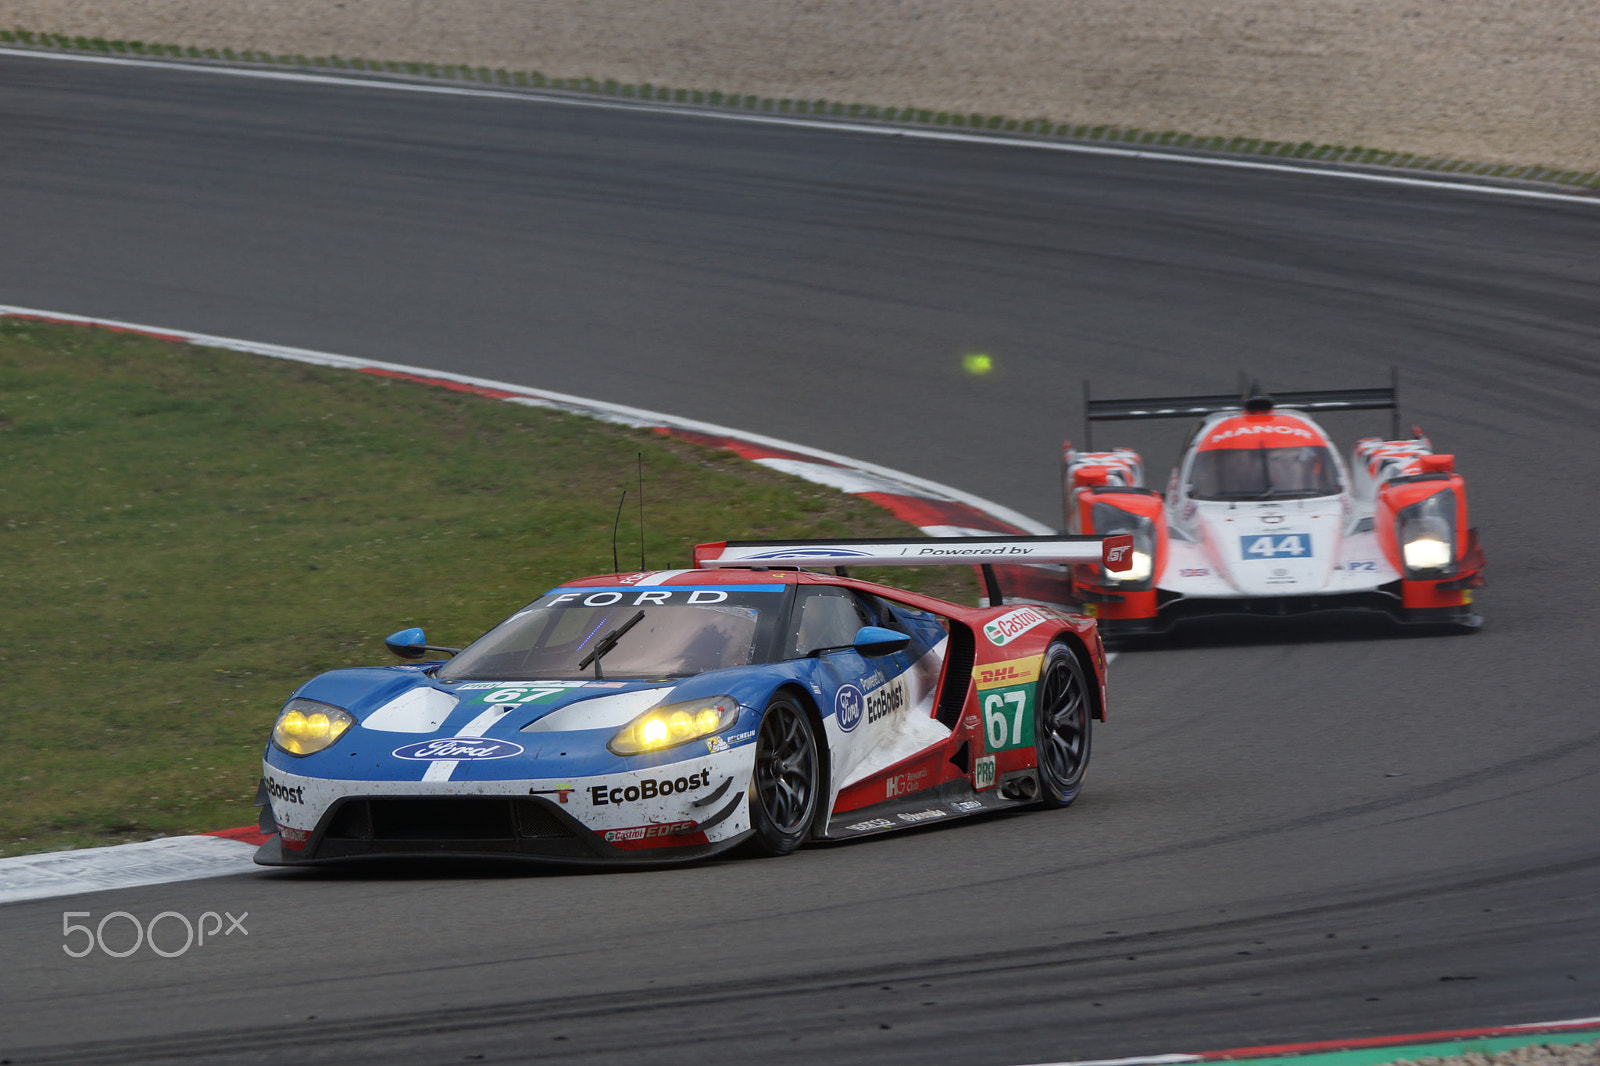 Sony SLT-A77 sample photo. Ford gt - wec 2016 nürburgring photography